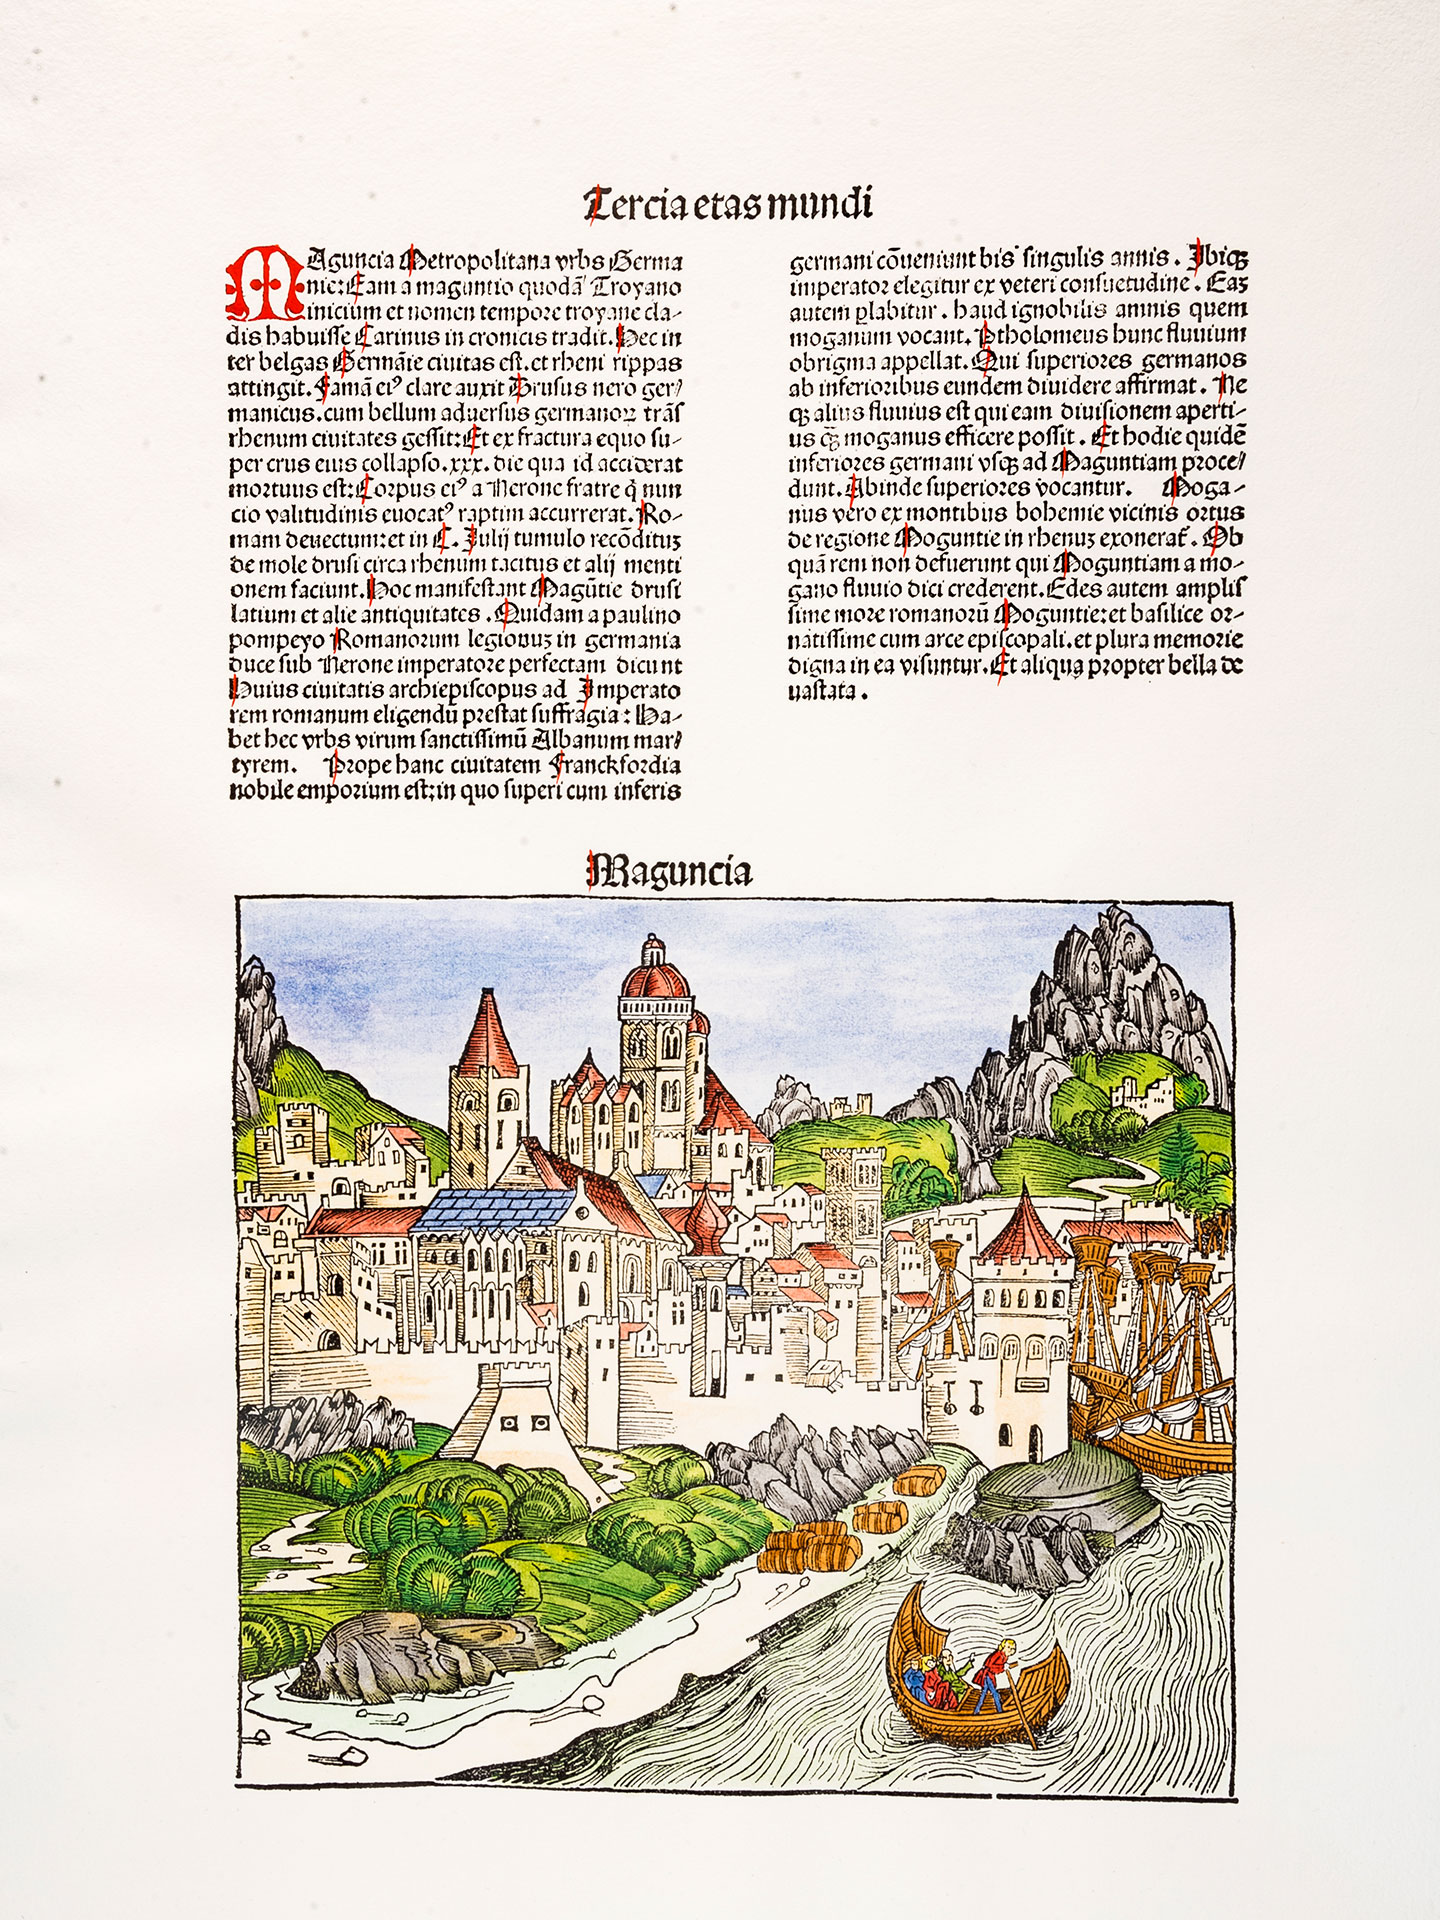 View of Mainz. Single print from Schedel’s Liber chronicarum